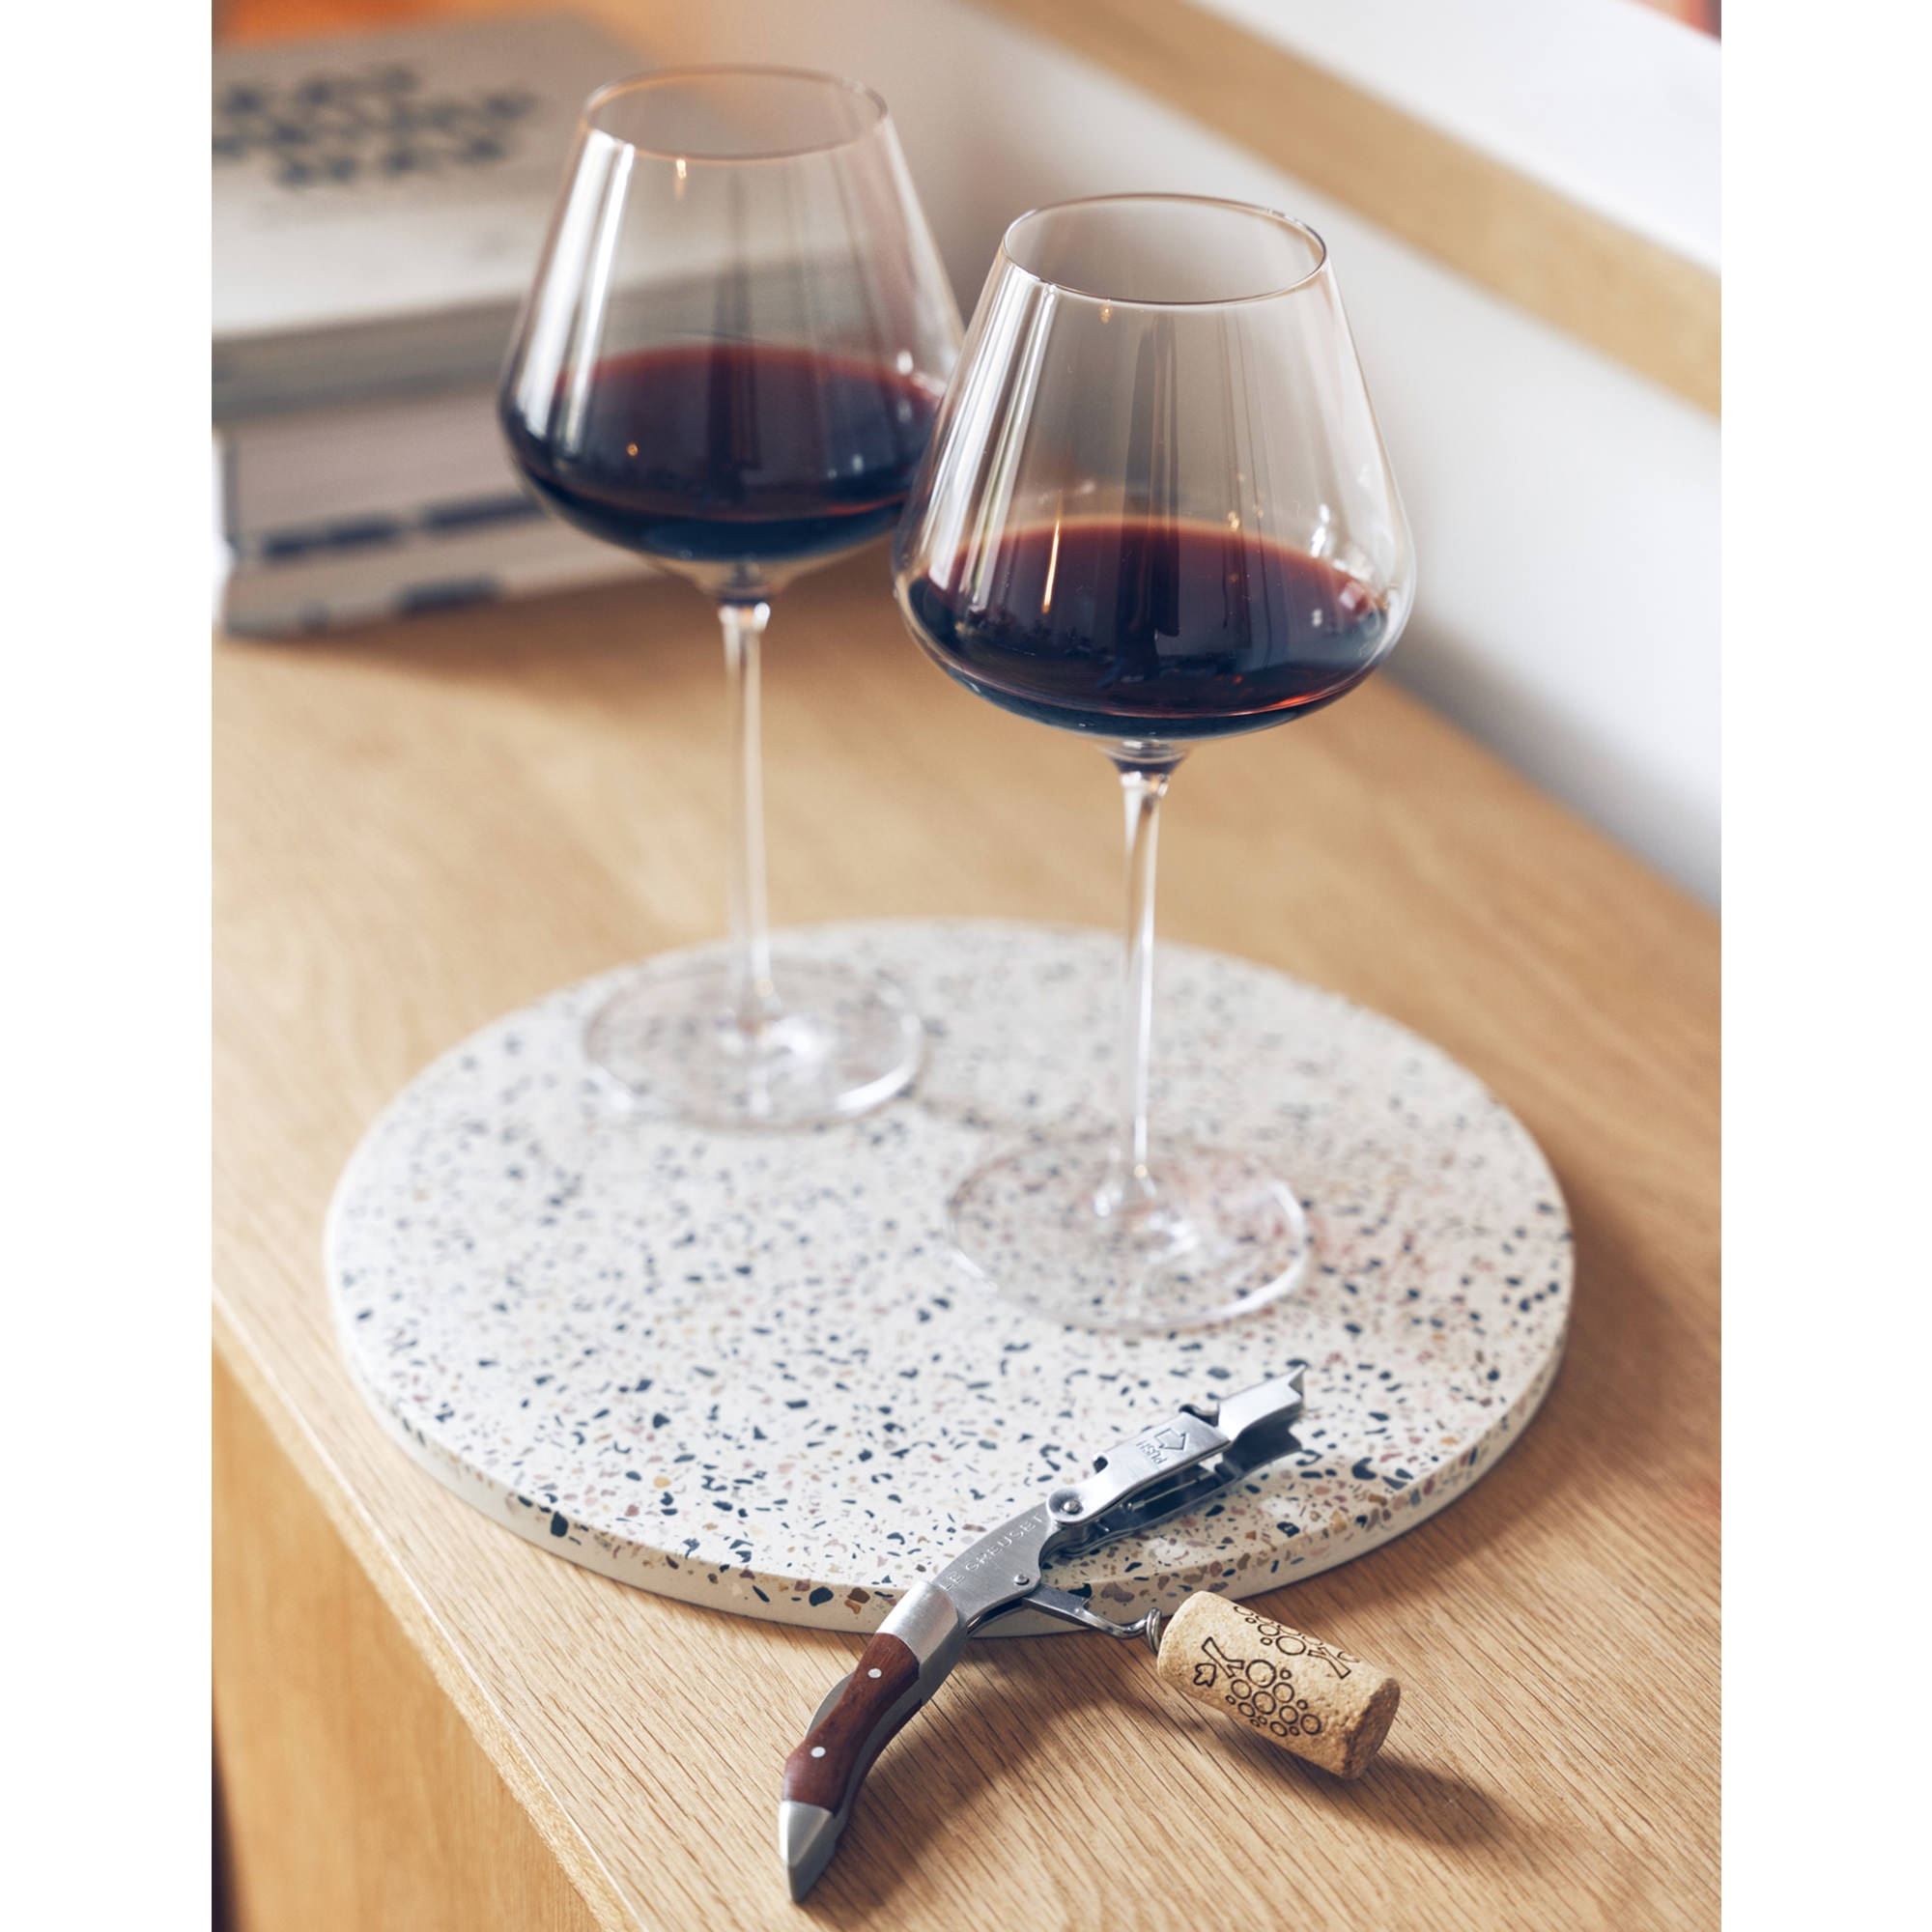 Le Creuset Young Red Wine Glass 635ml Set of 4 Image 2